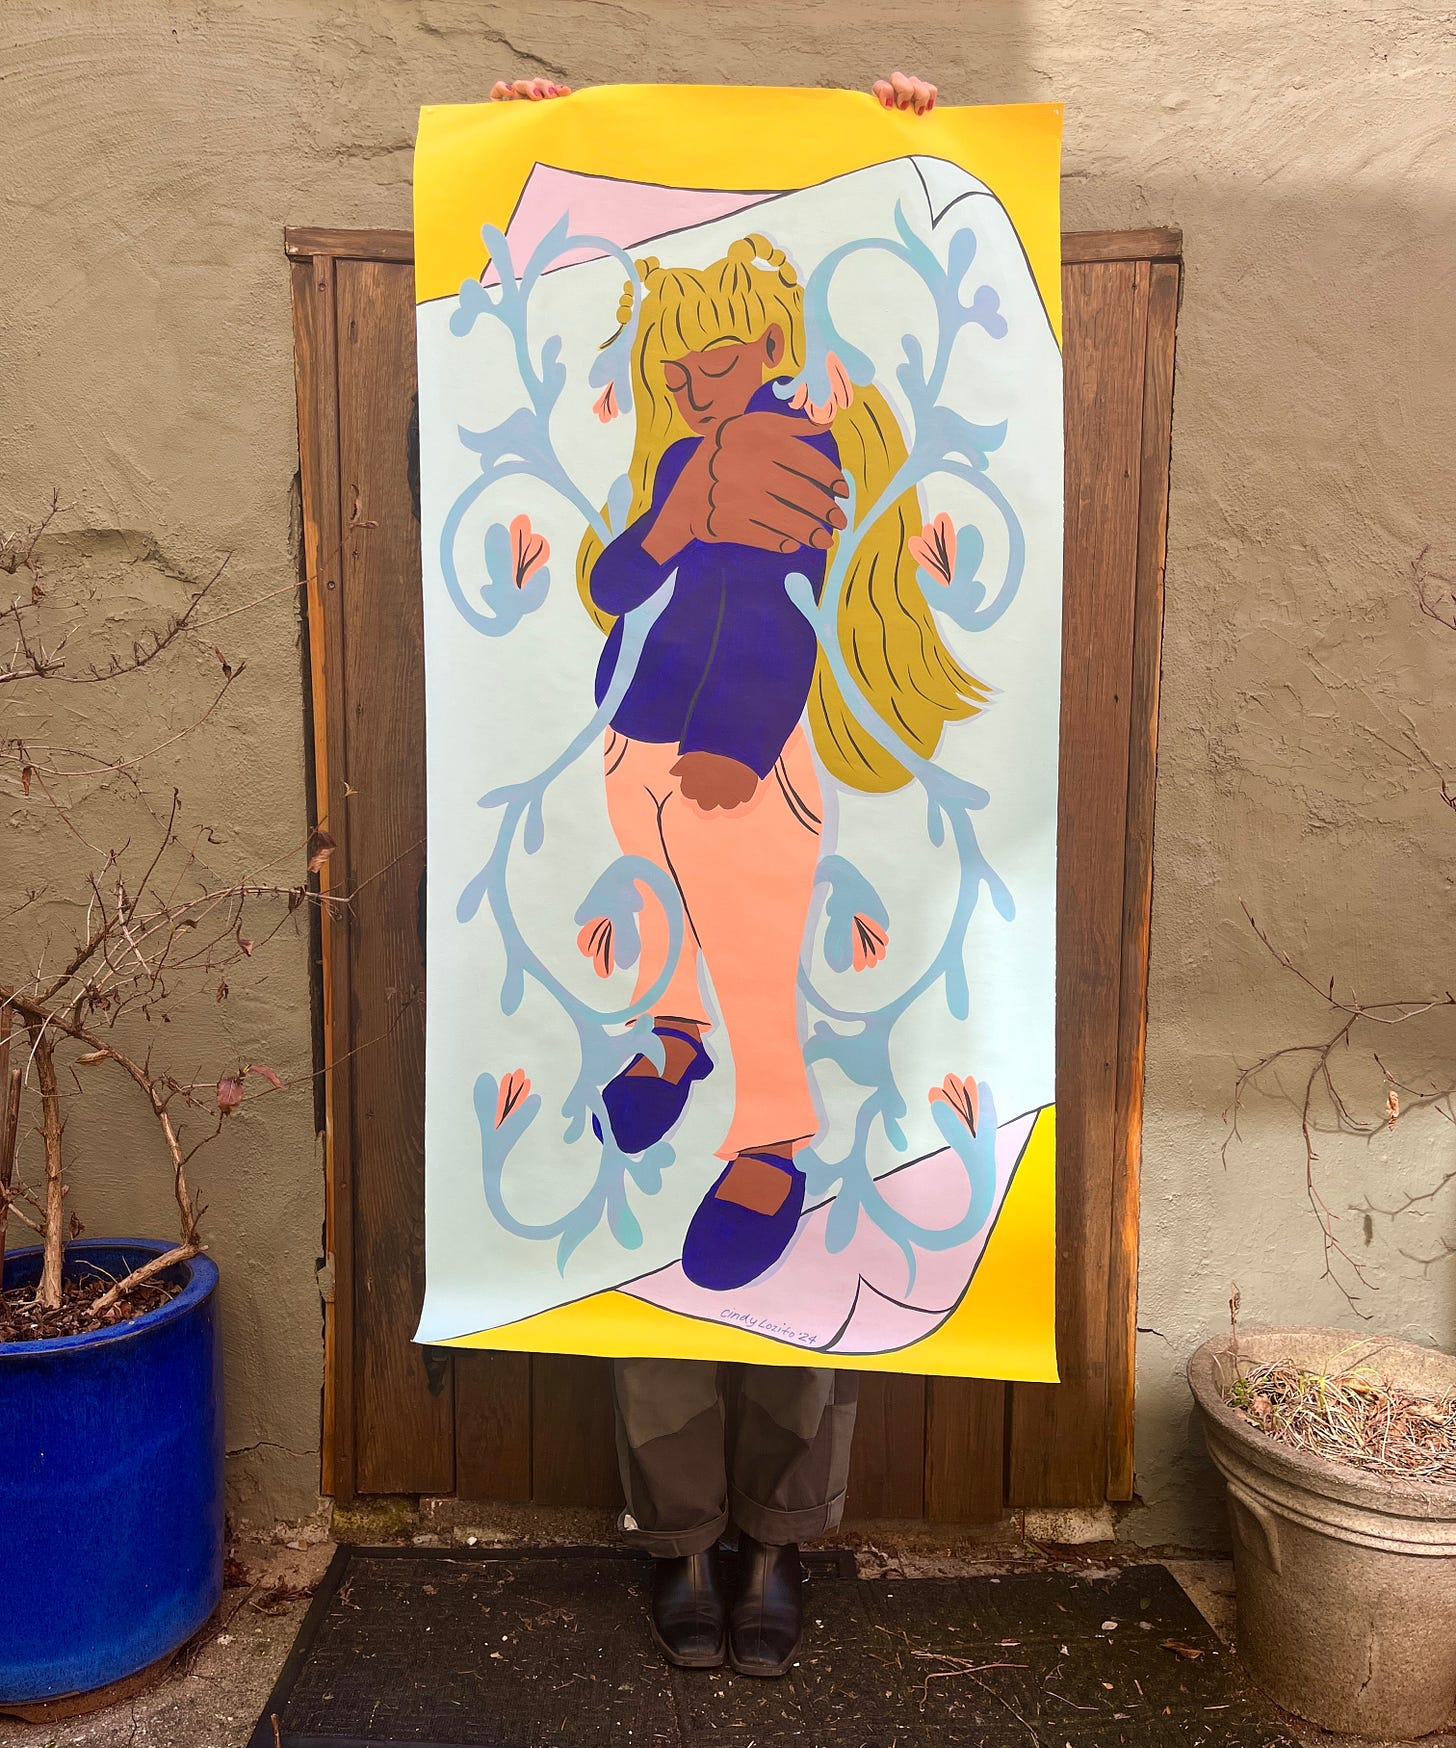 Me holding a life-size mural cloth of a character holding her shoulder amid swirling floral motifs